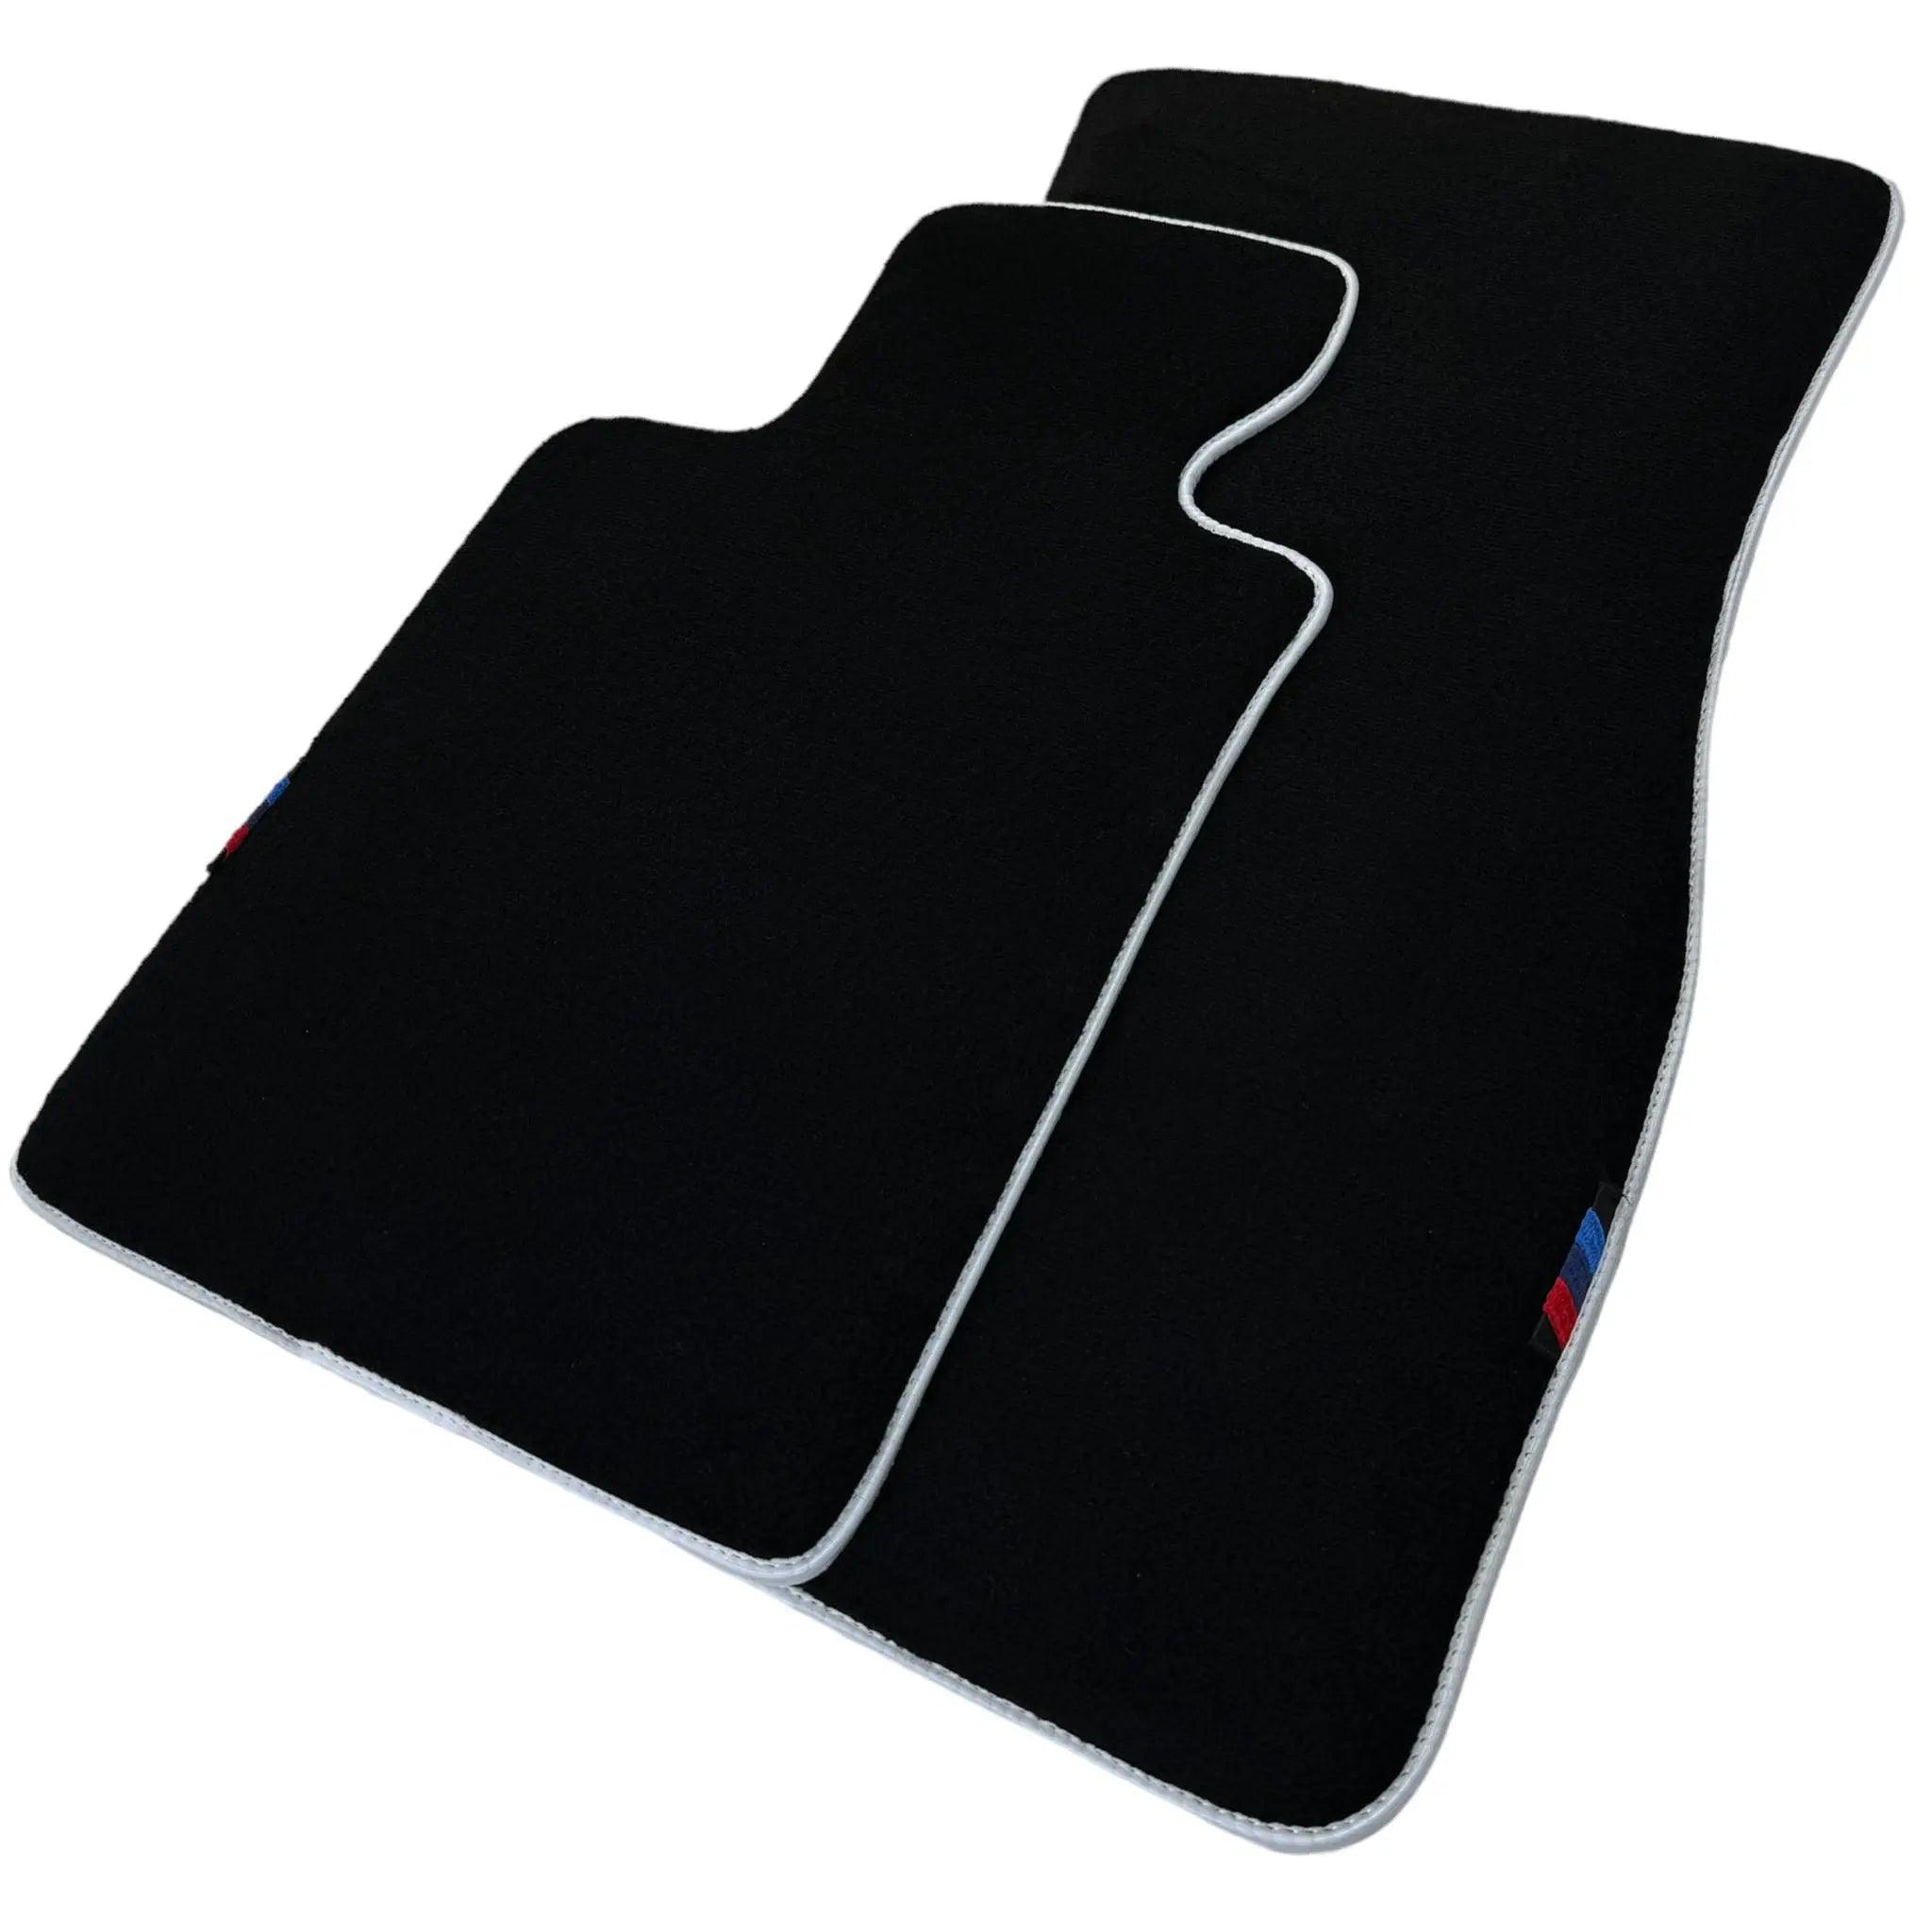 Black Floor Mats For BMW 2 Series F44 Gran Coupe | White Trim